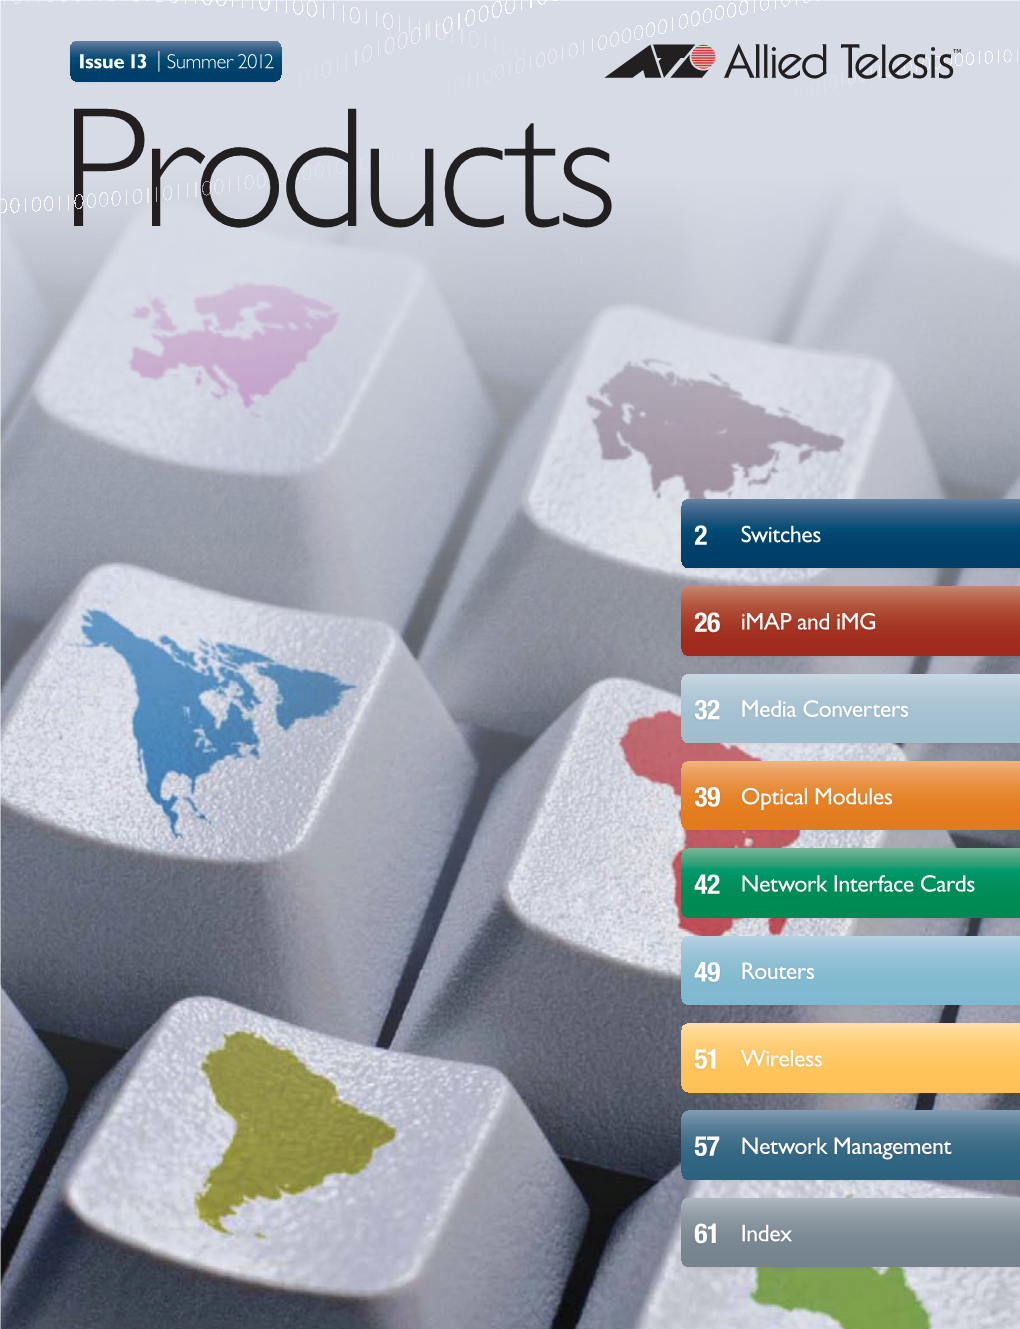 Allied Telesis Product Catalog, Issue 13 (Summer 2012)